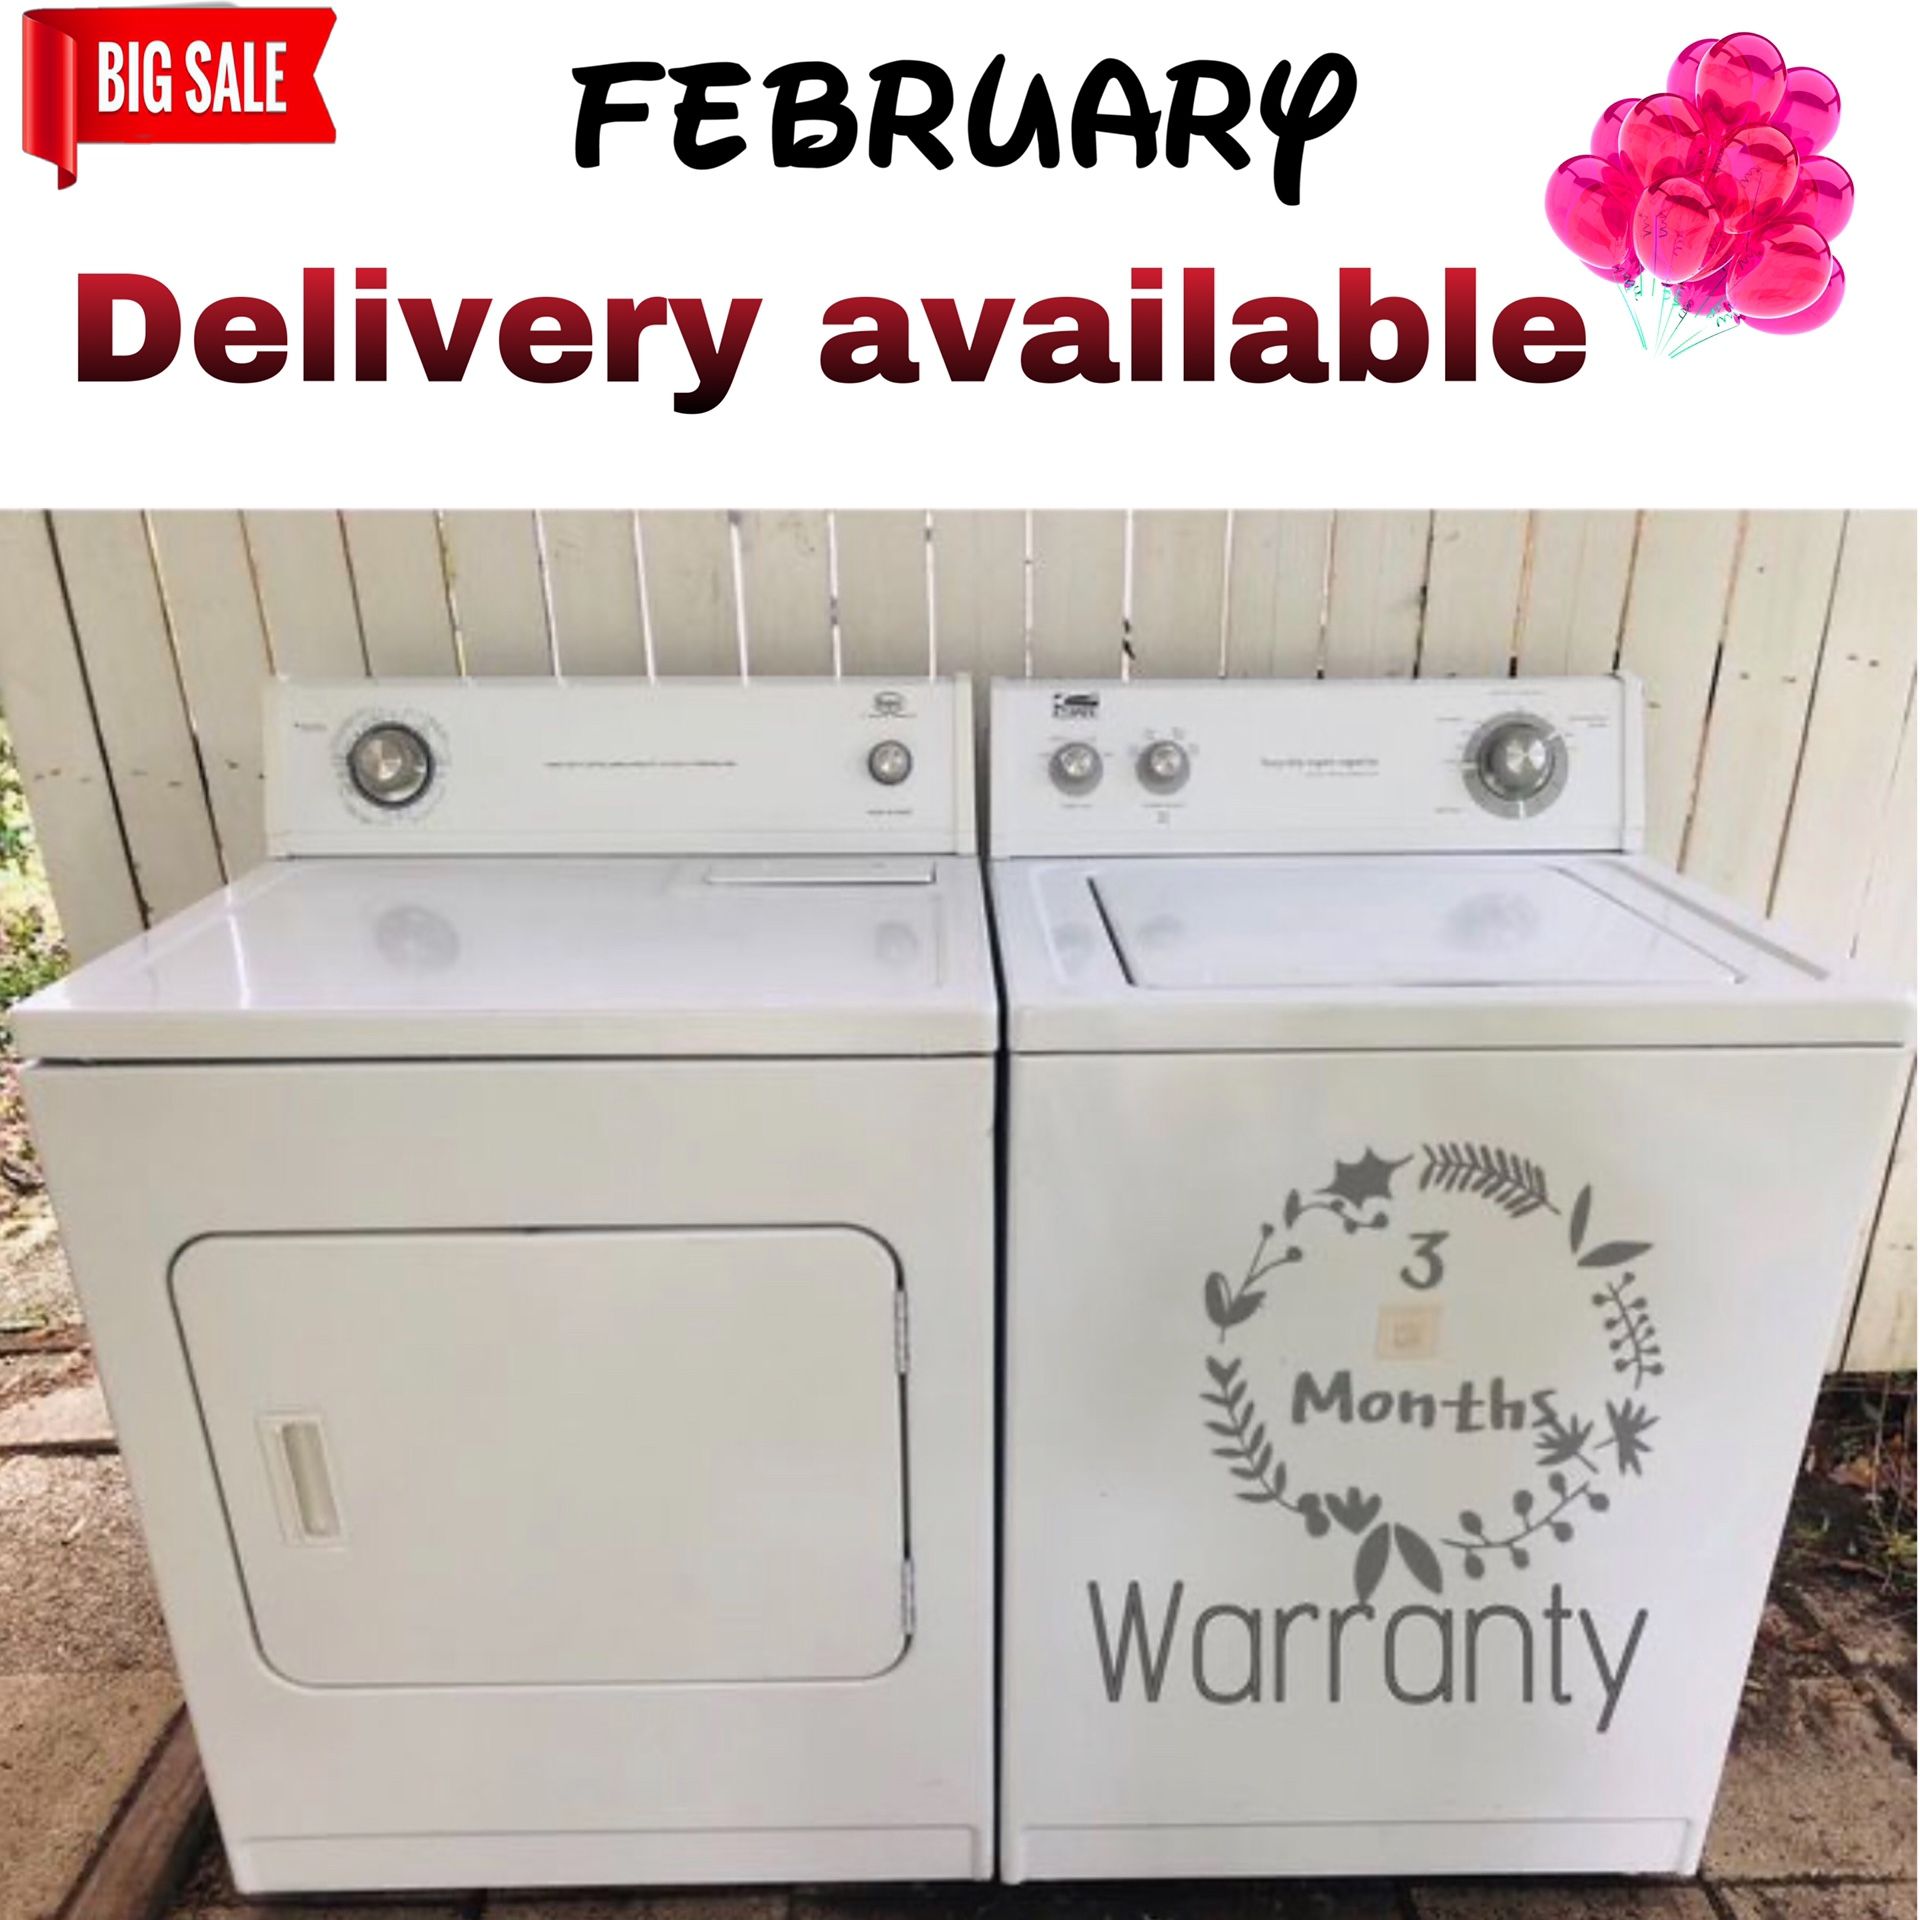 ❌ whirlpool washer and dryer ❌